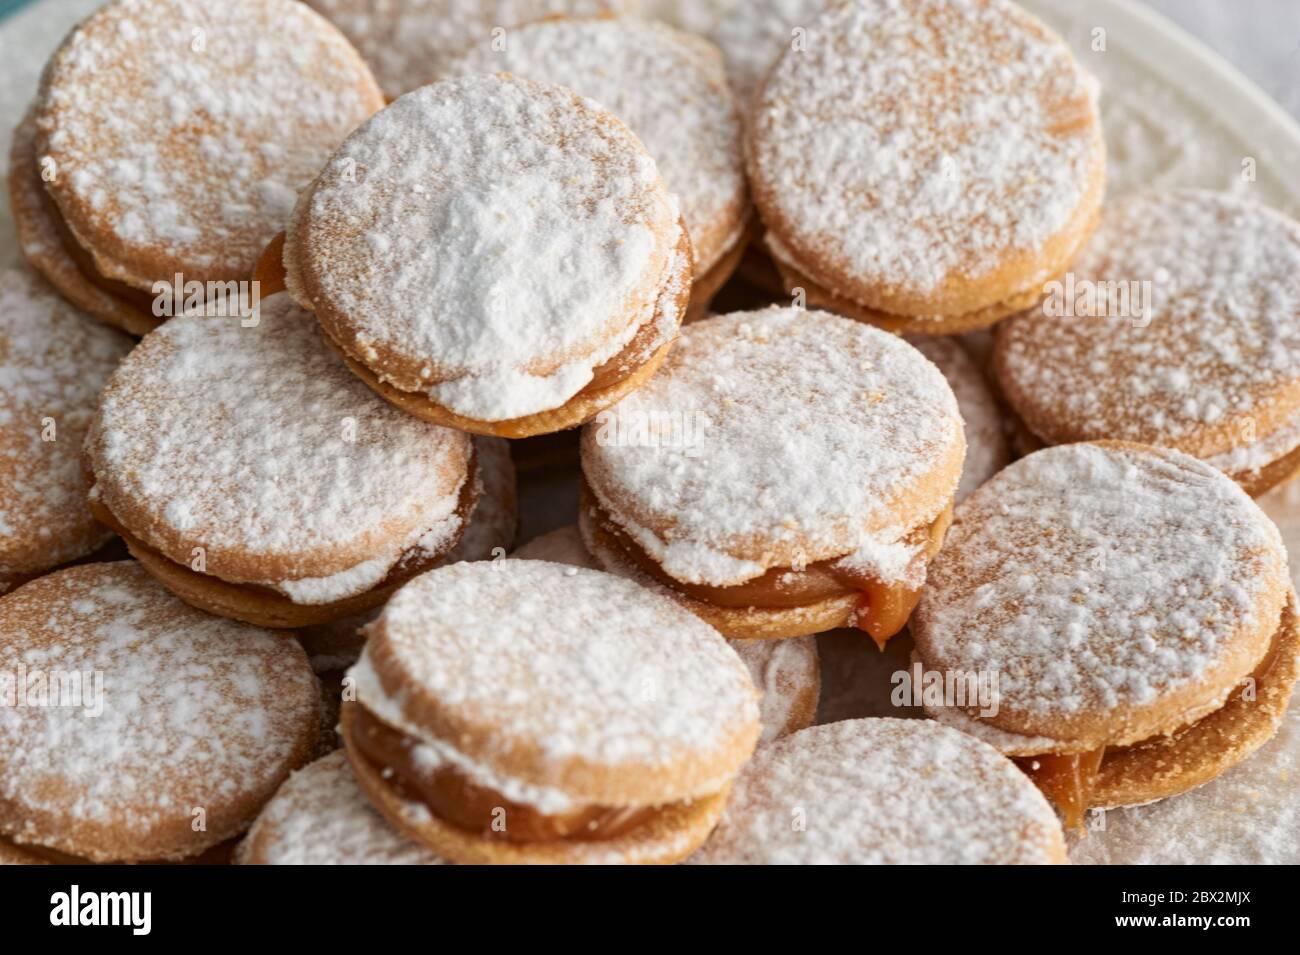 Alfajores: Traditional Peruvian cookies filled with caramel and white sugar dust on top. Stock Photo